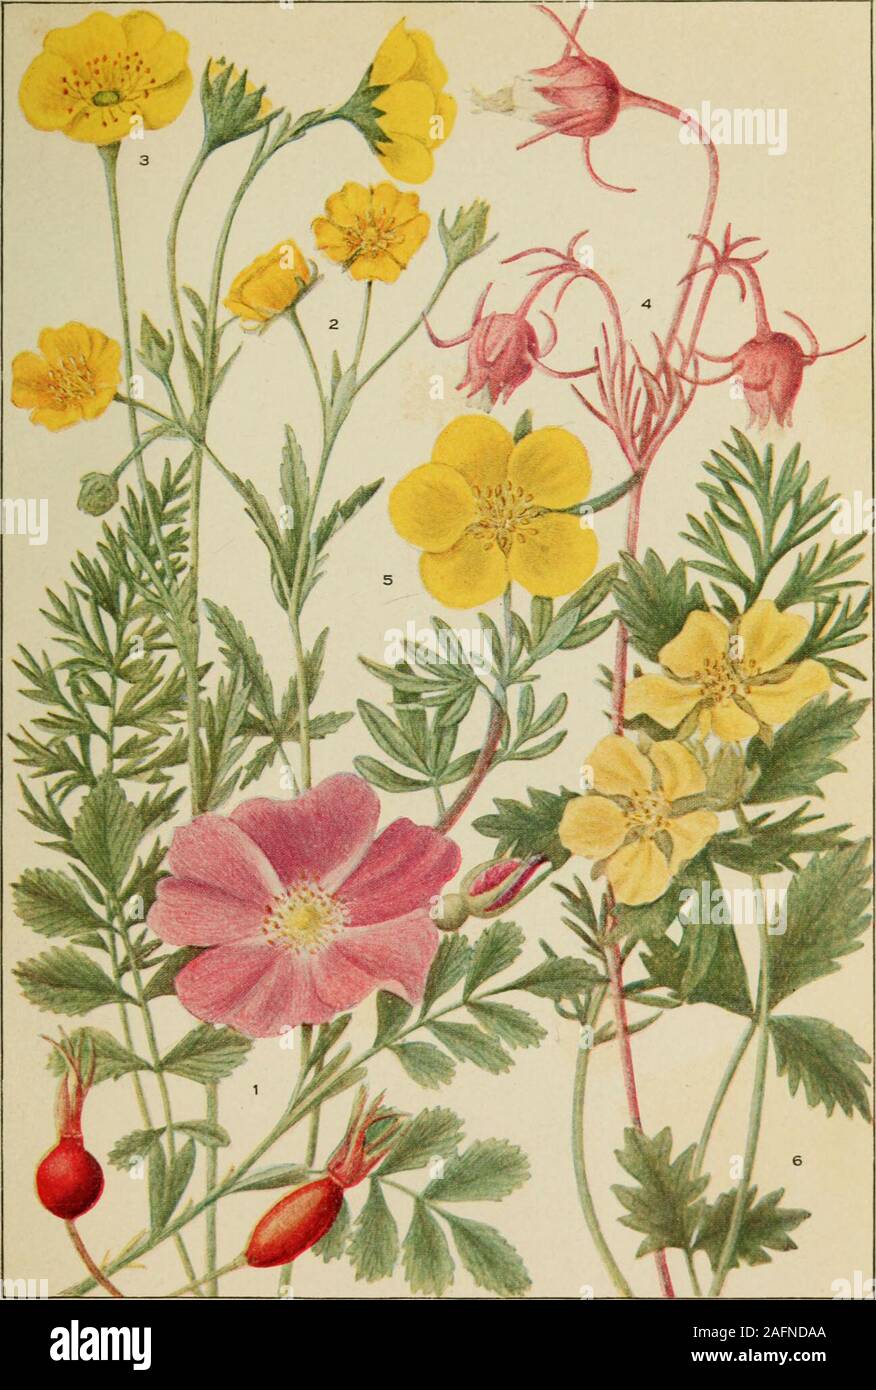 . Rocky Mountain flowers : an illustrated guide for plant-lovers and plant-users. aves entire, revolute, smooth, leathery, lance- oblong to linear C. ledifolius Chamaebatiaria Maximowicz 1879(Resembling Chamaebatia, a low bramble) „Sepals 5, united into a calyx, petals 5, white, stamens many, pistils 5,hairy, follicles leathery, 1-valved, united at the base; flowers in terminalleafy panicles; leaves leathery, twice-pinnately dissected; shrub.Stems diffusely branched; leaves narrowly lanceolate C. millefolium Chamaerhodus Bunge 1829 Ground Rose(Gr. chamae, on the ground, rhodon, rose) Sepals 5, Stock Photo